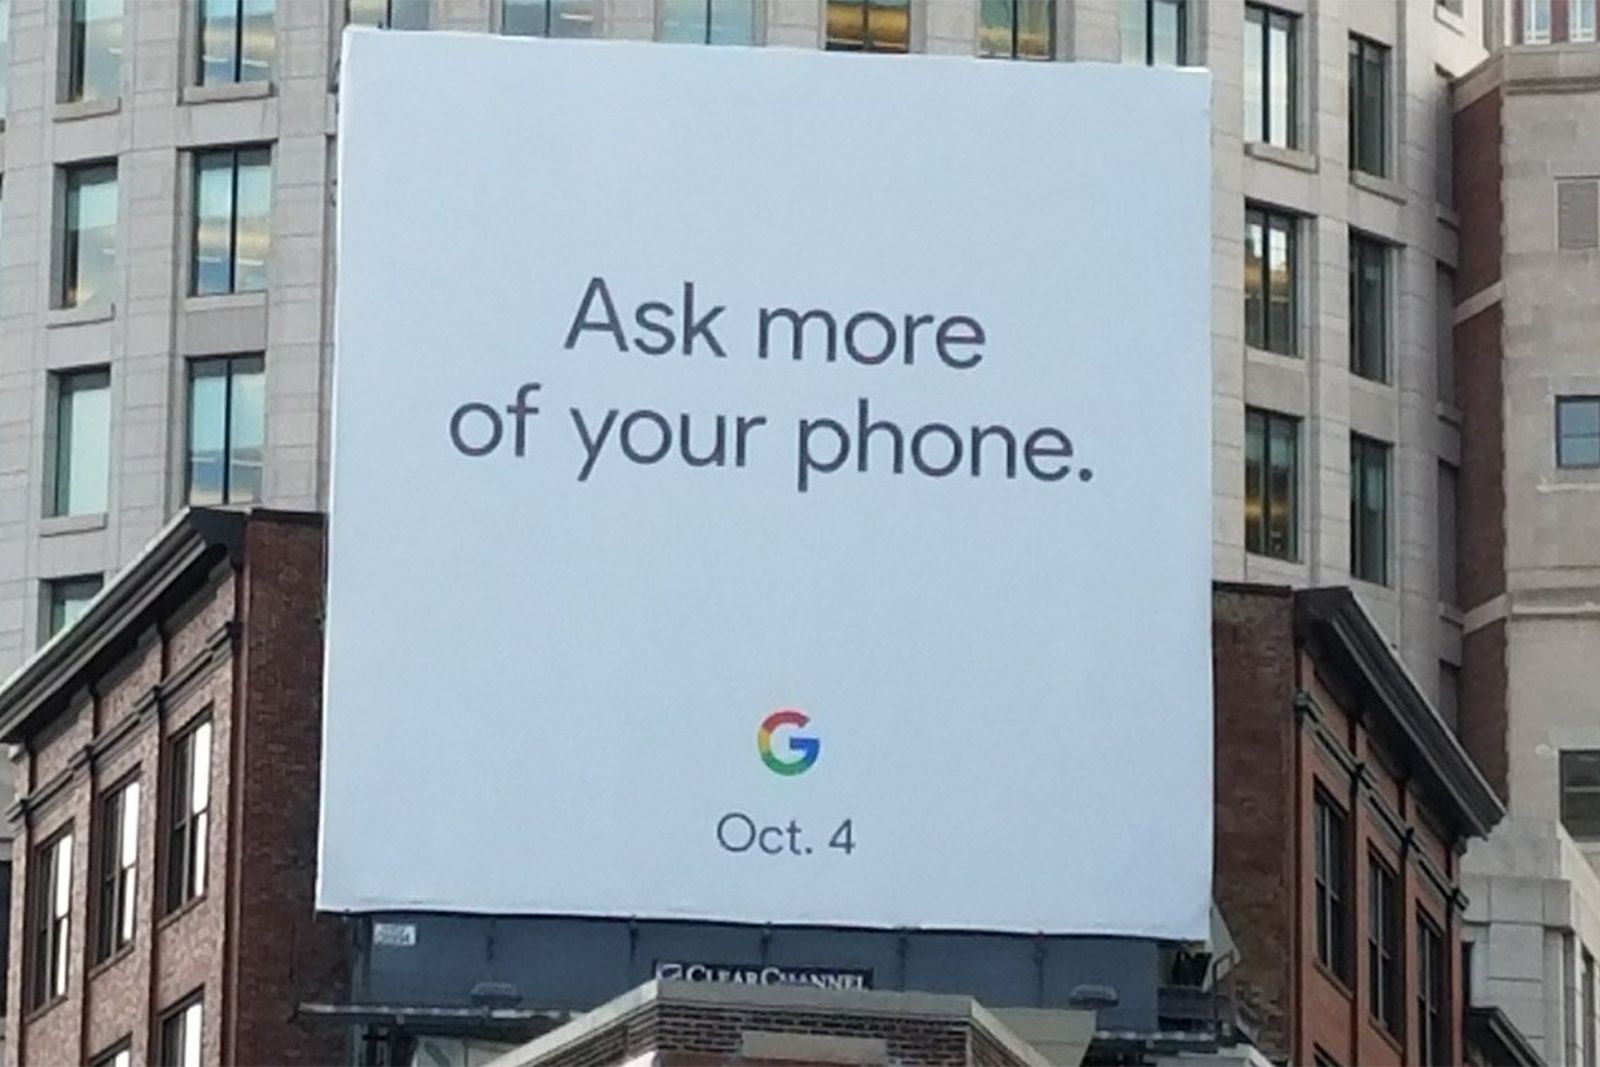 Google Pixel XL 2 confirmed to be LG-made possibly unveiled on 4 October image 1